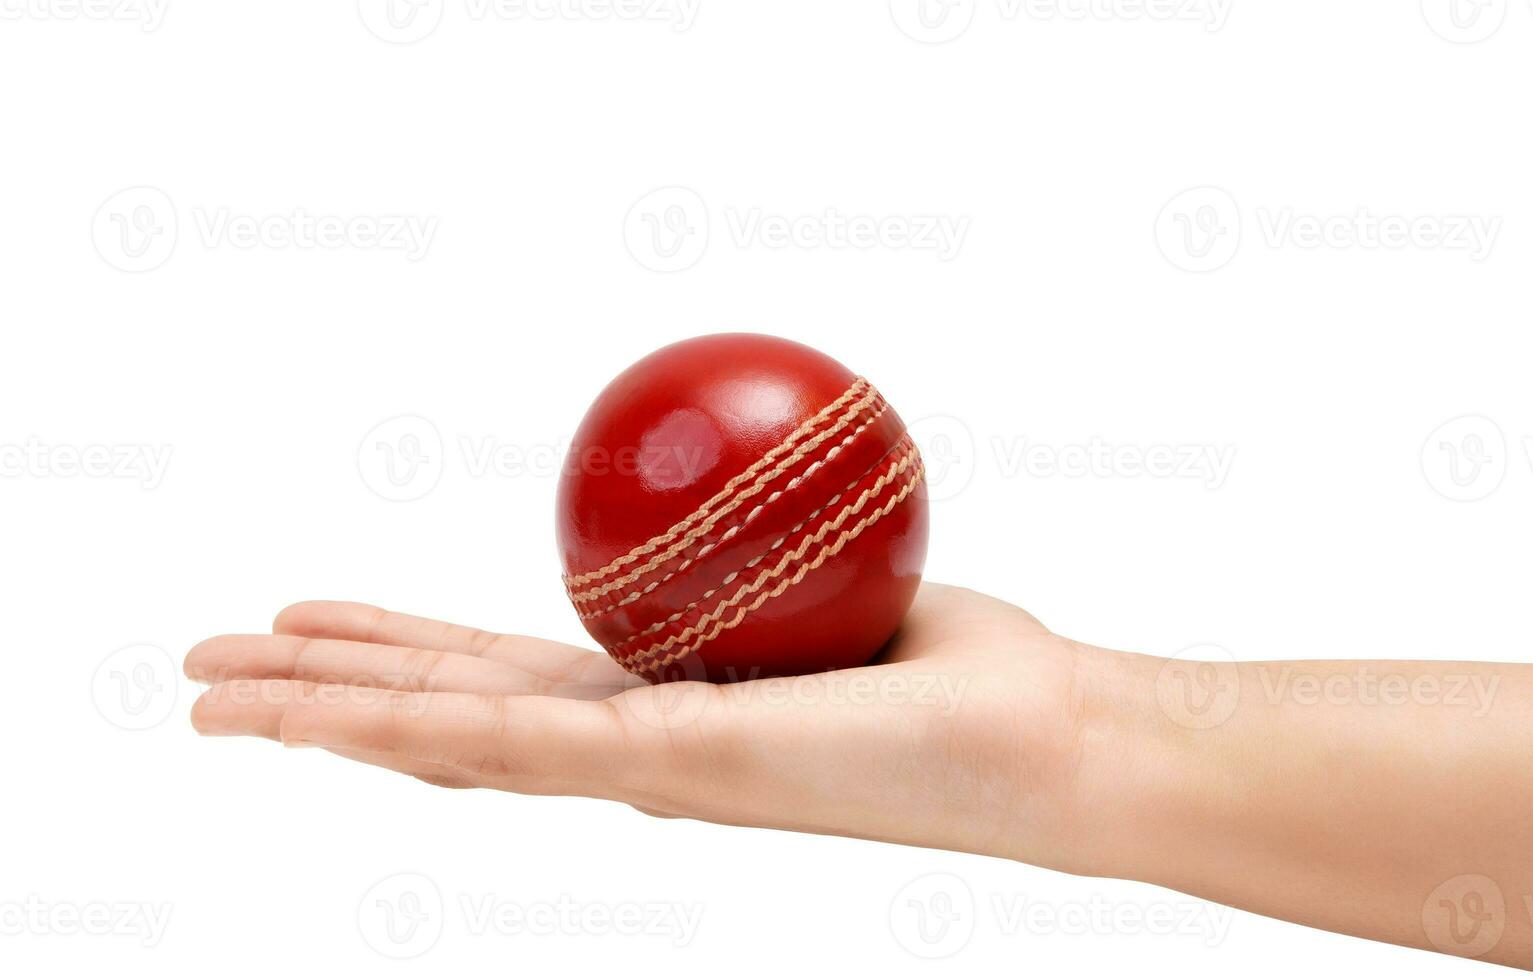 Shiny Red Test Match Leather Stitch Cricket Ball In Women Hand Closeup Photo White Background